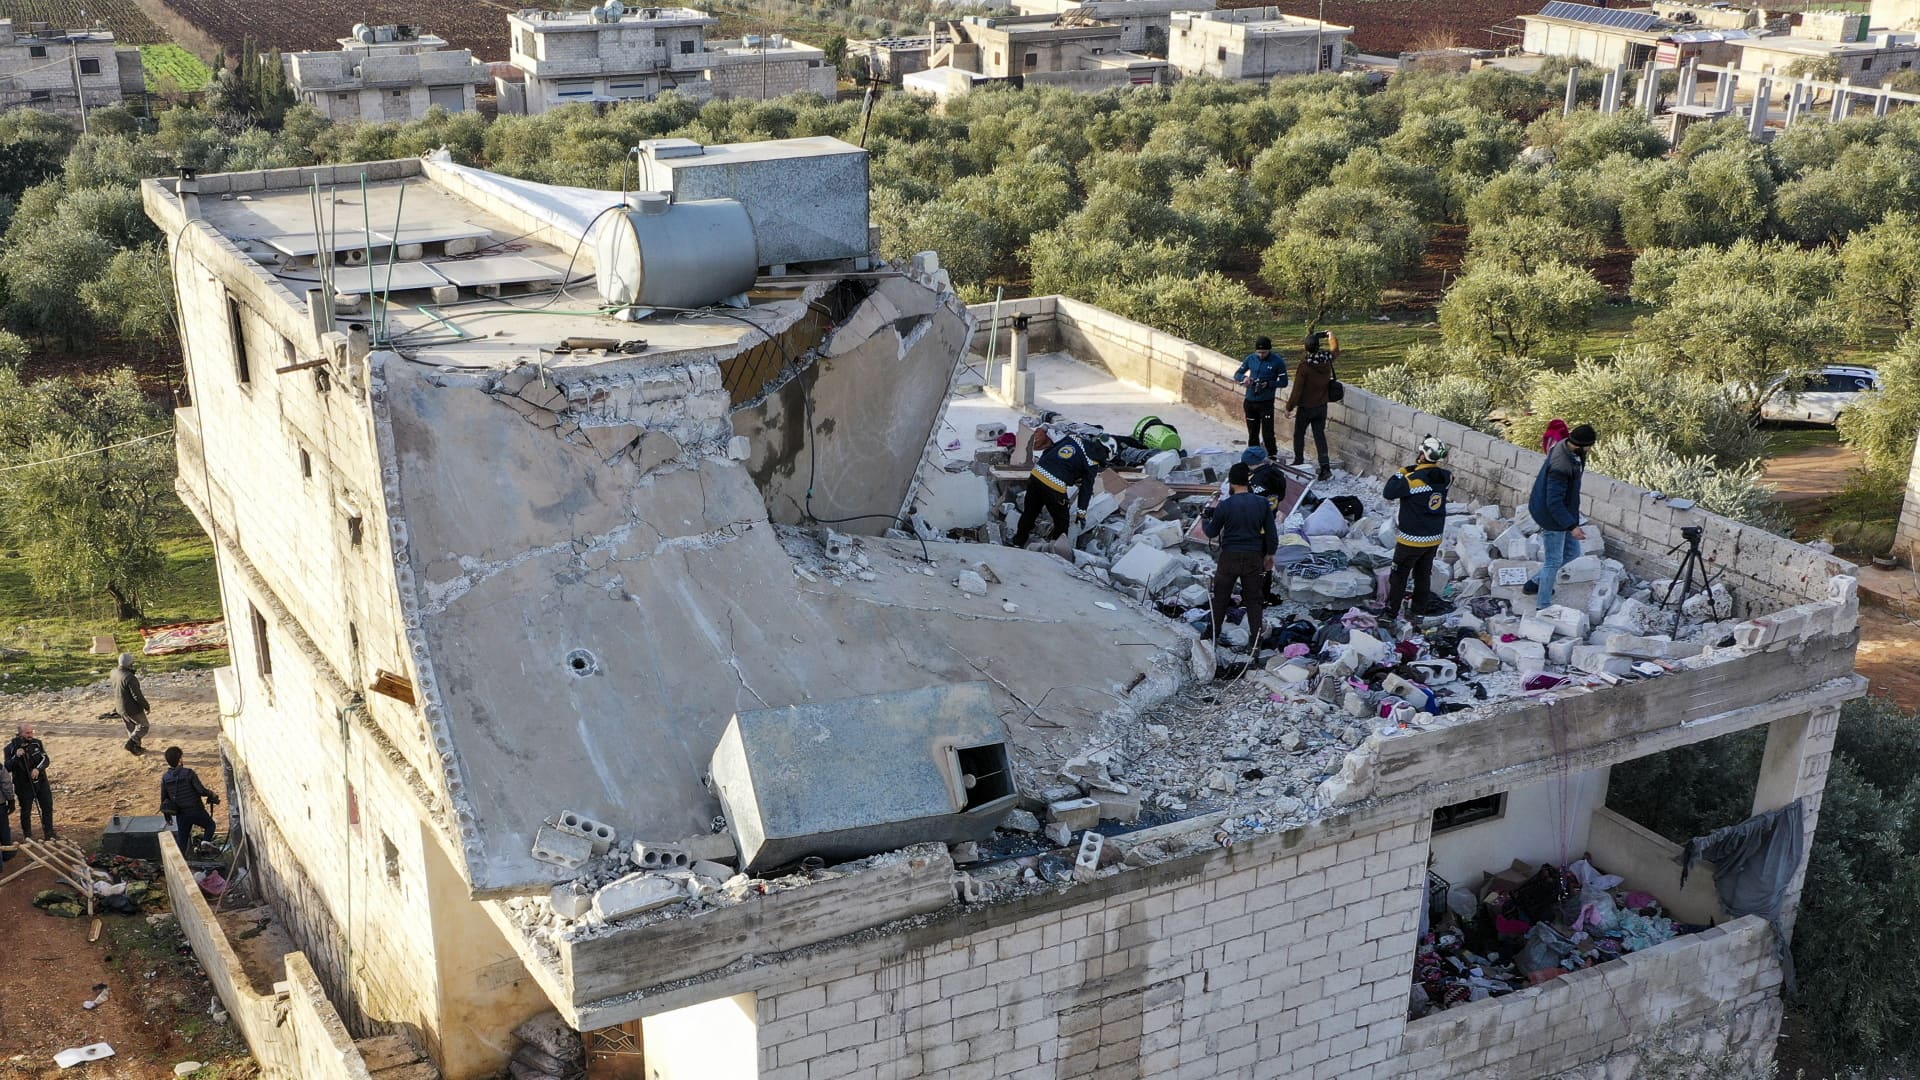 People inspect a destroyed house following an operation by the U.S. military in the Syrian village of Atmeh, in Idlib province, Syria, Thursday, Feb. 3, 2022.